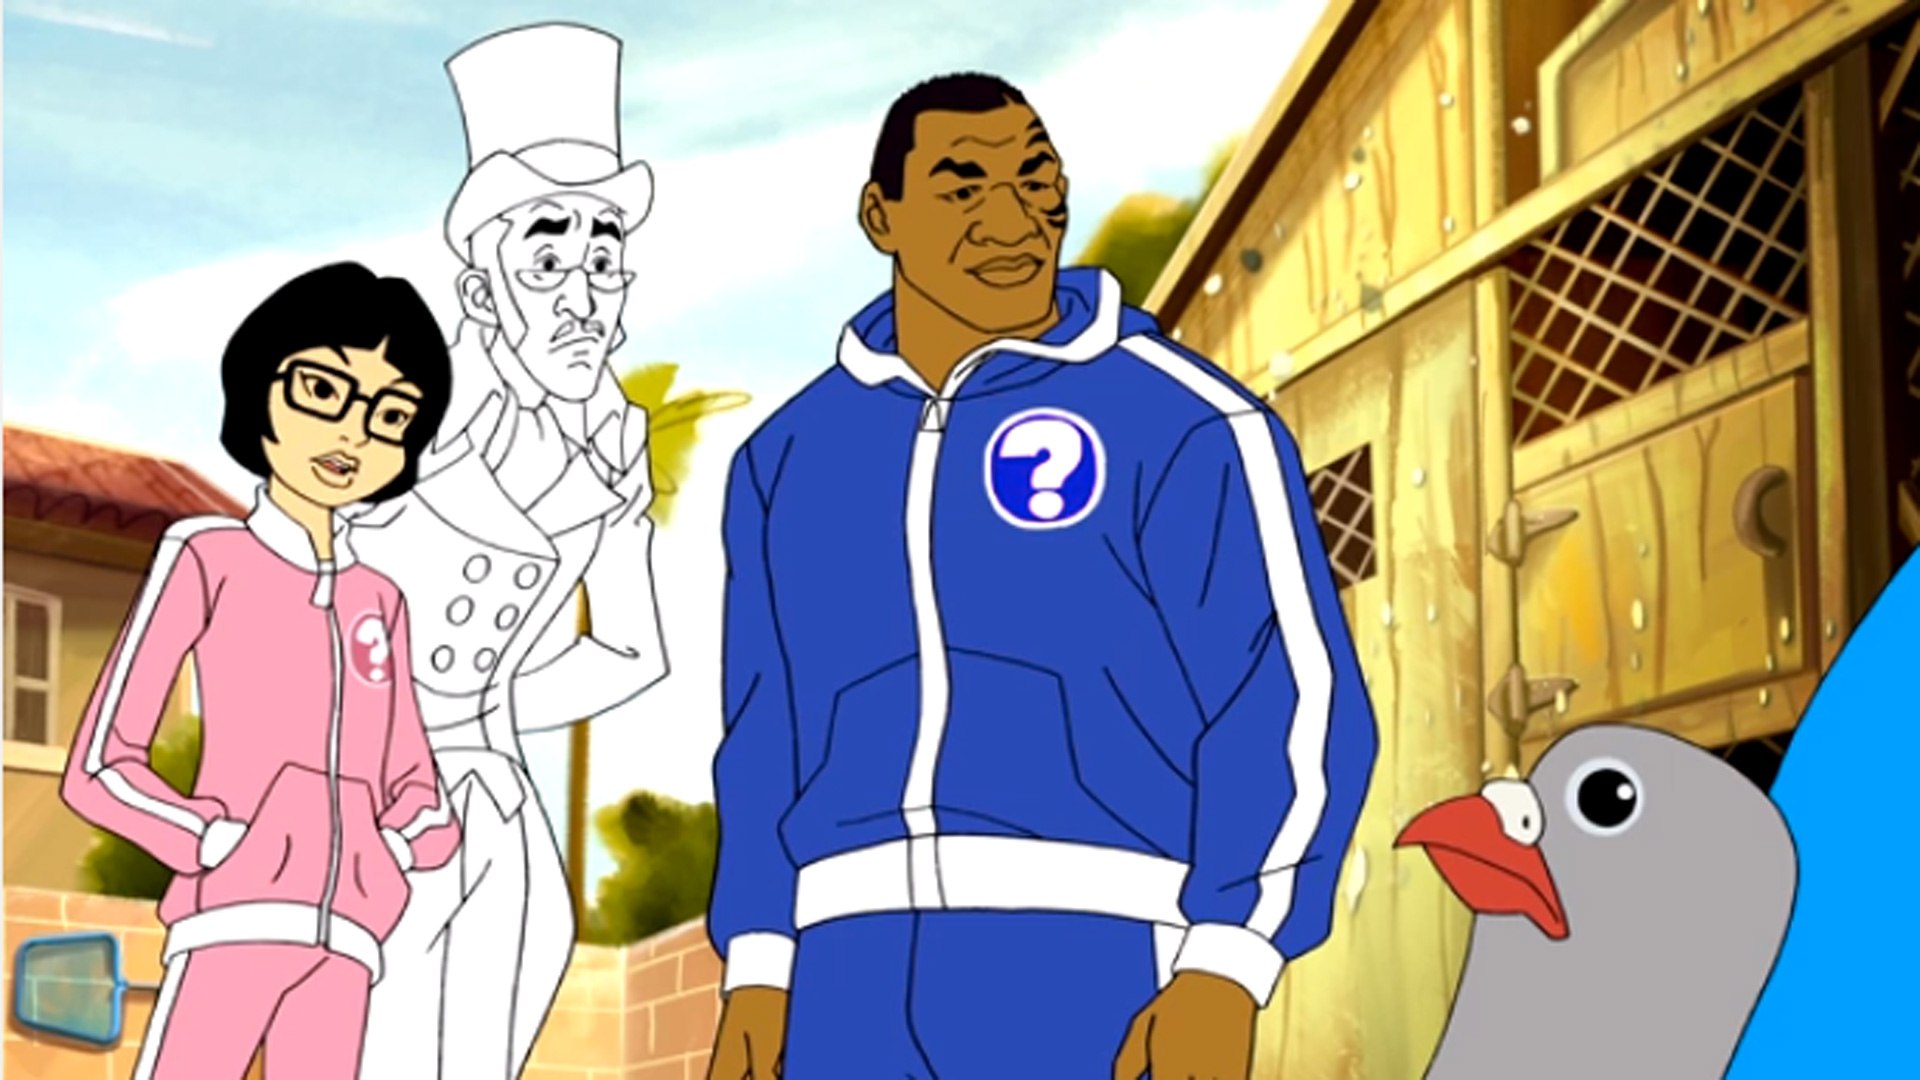 Mike Tyson Mysteries Wallpapers